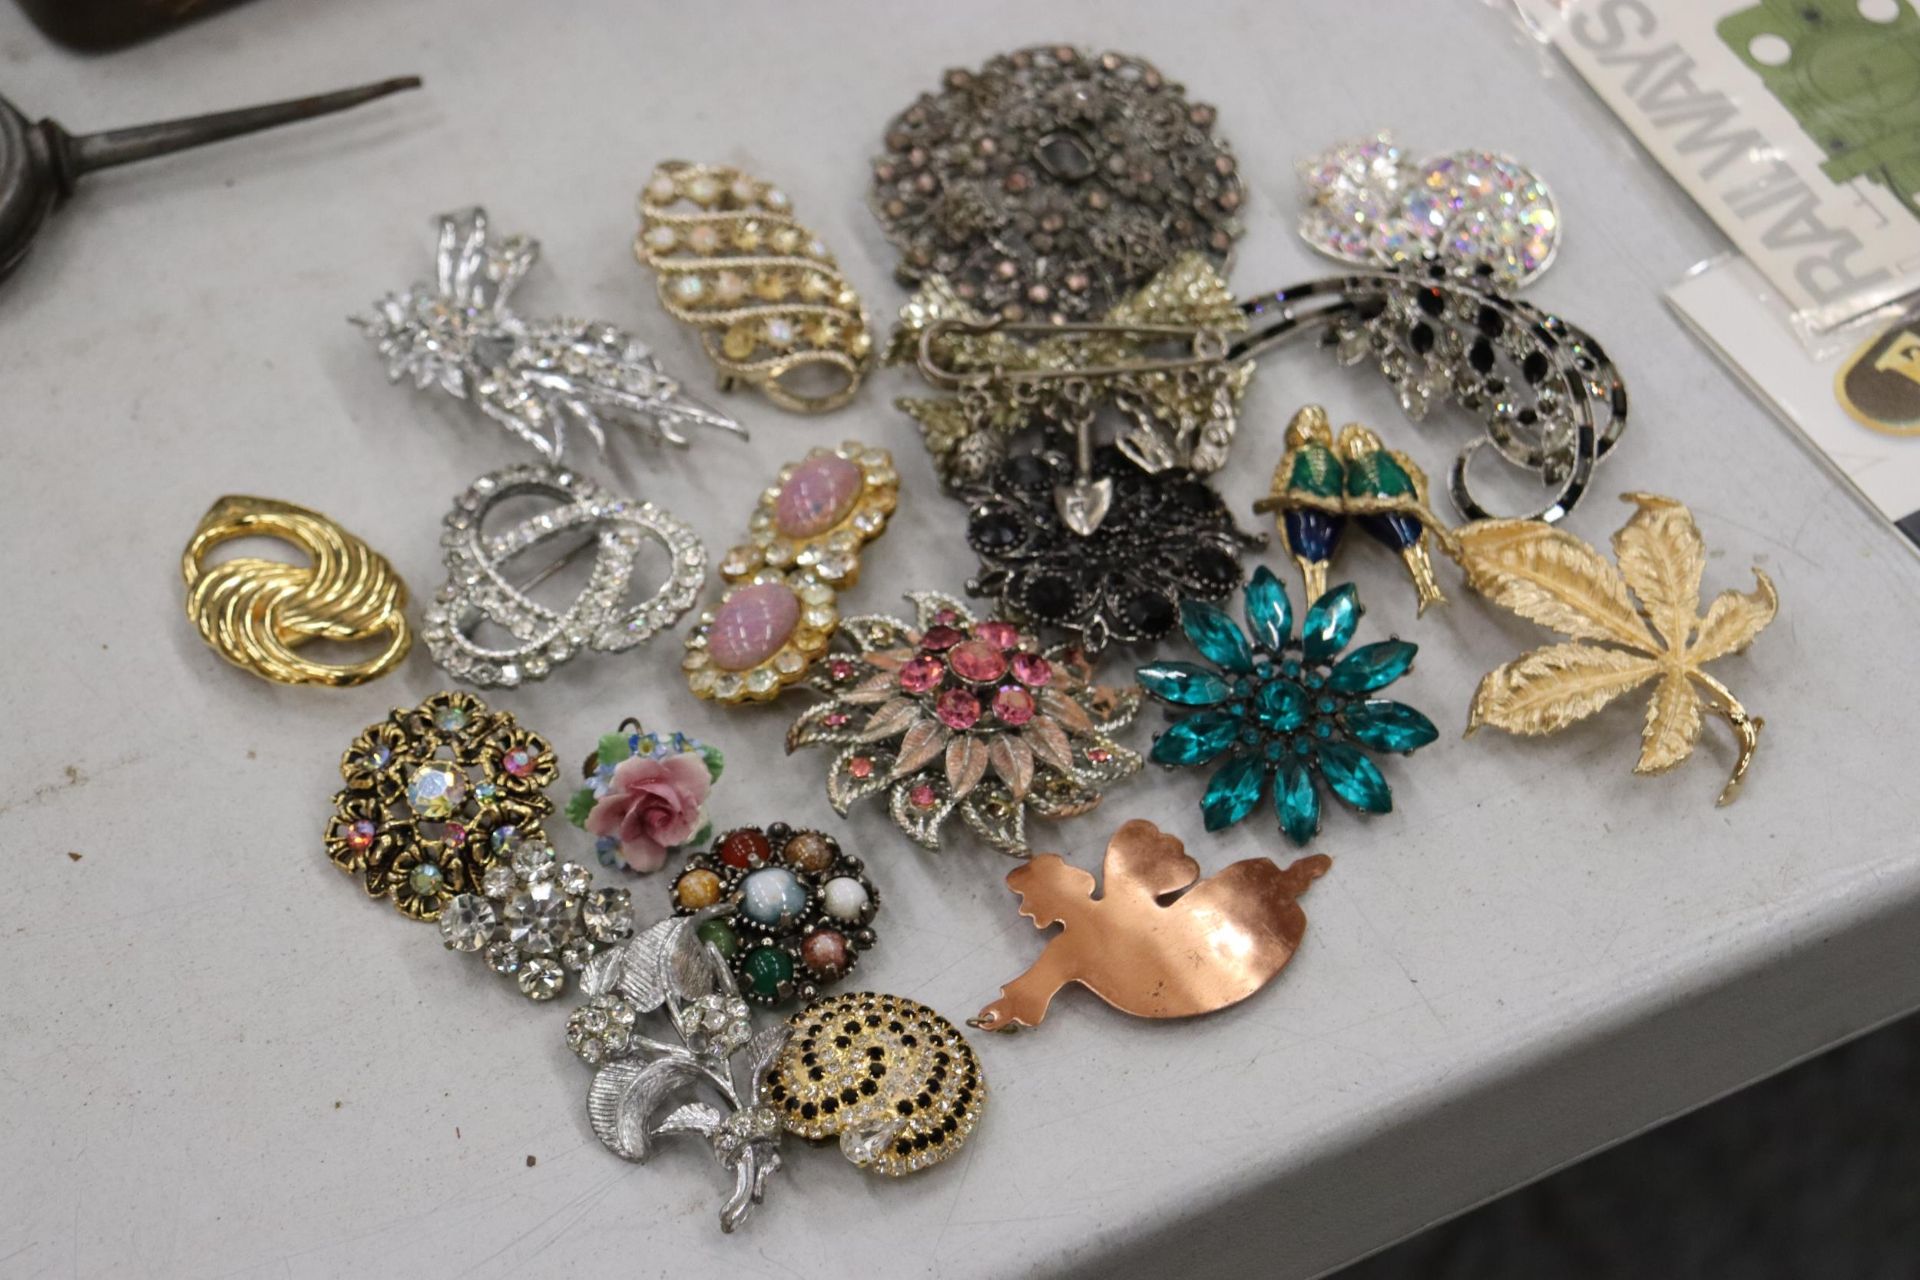 A QUANTITY OF VINTAGE BROOCHES - 21 IN TOTAL